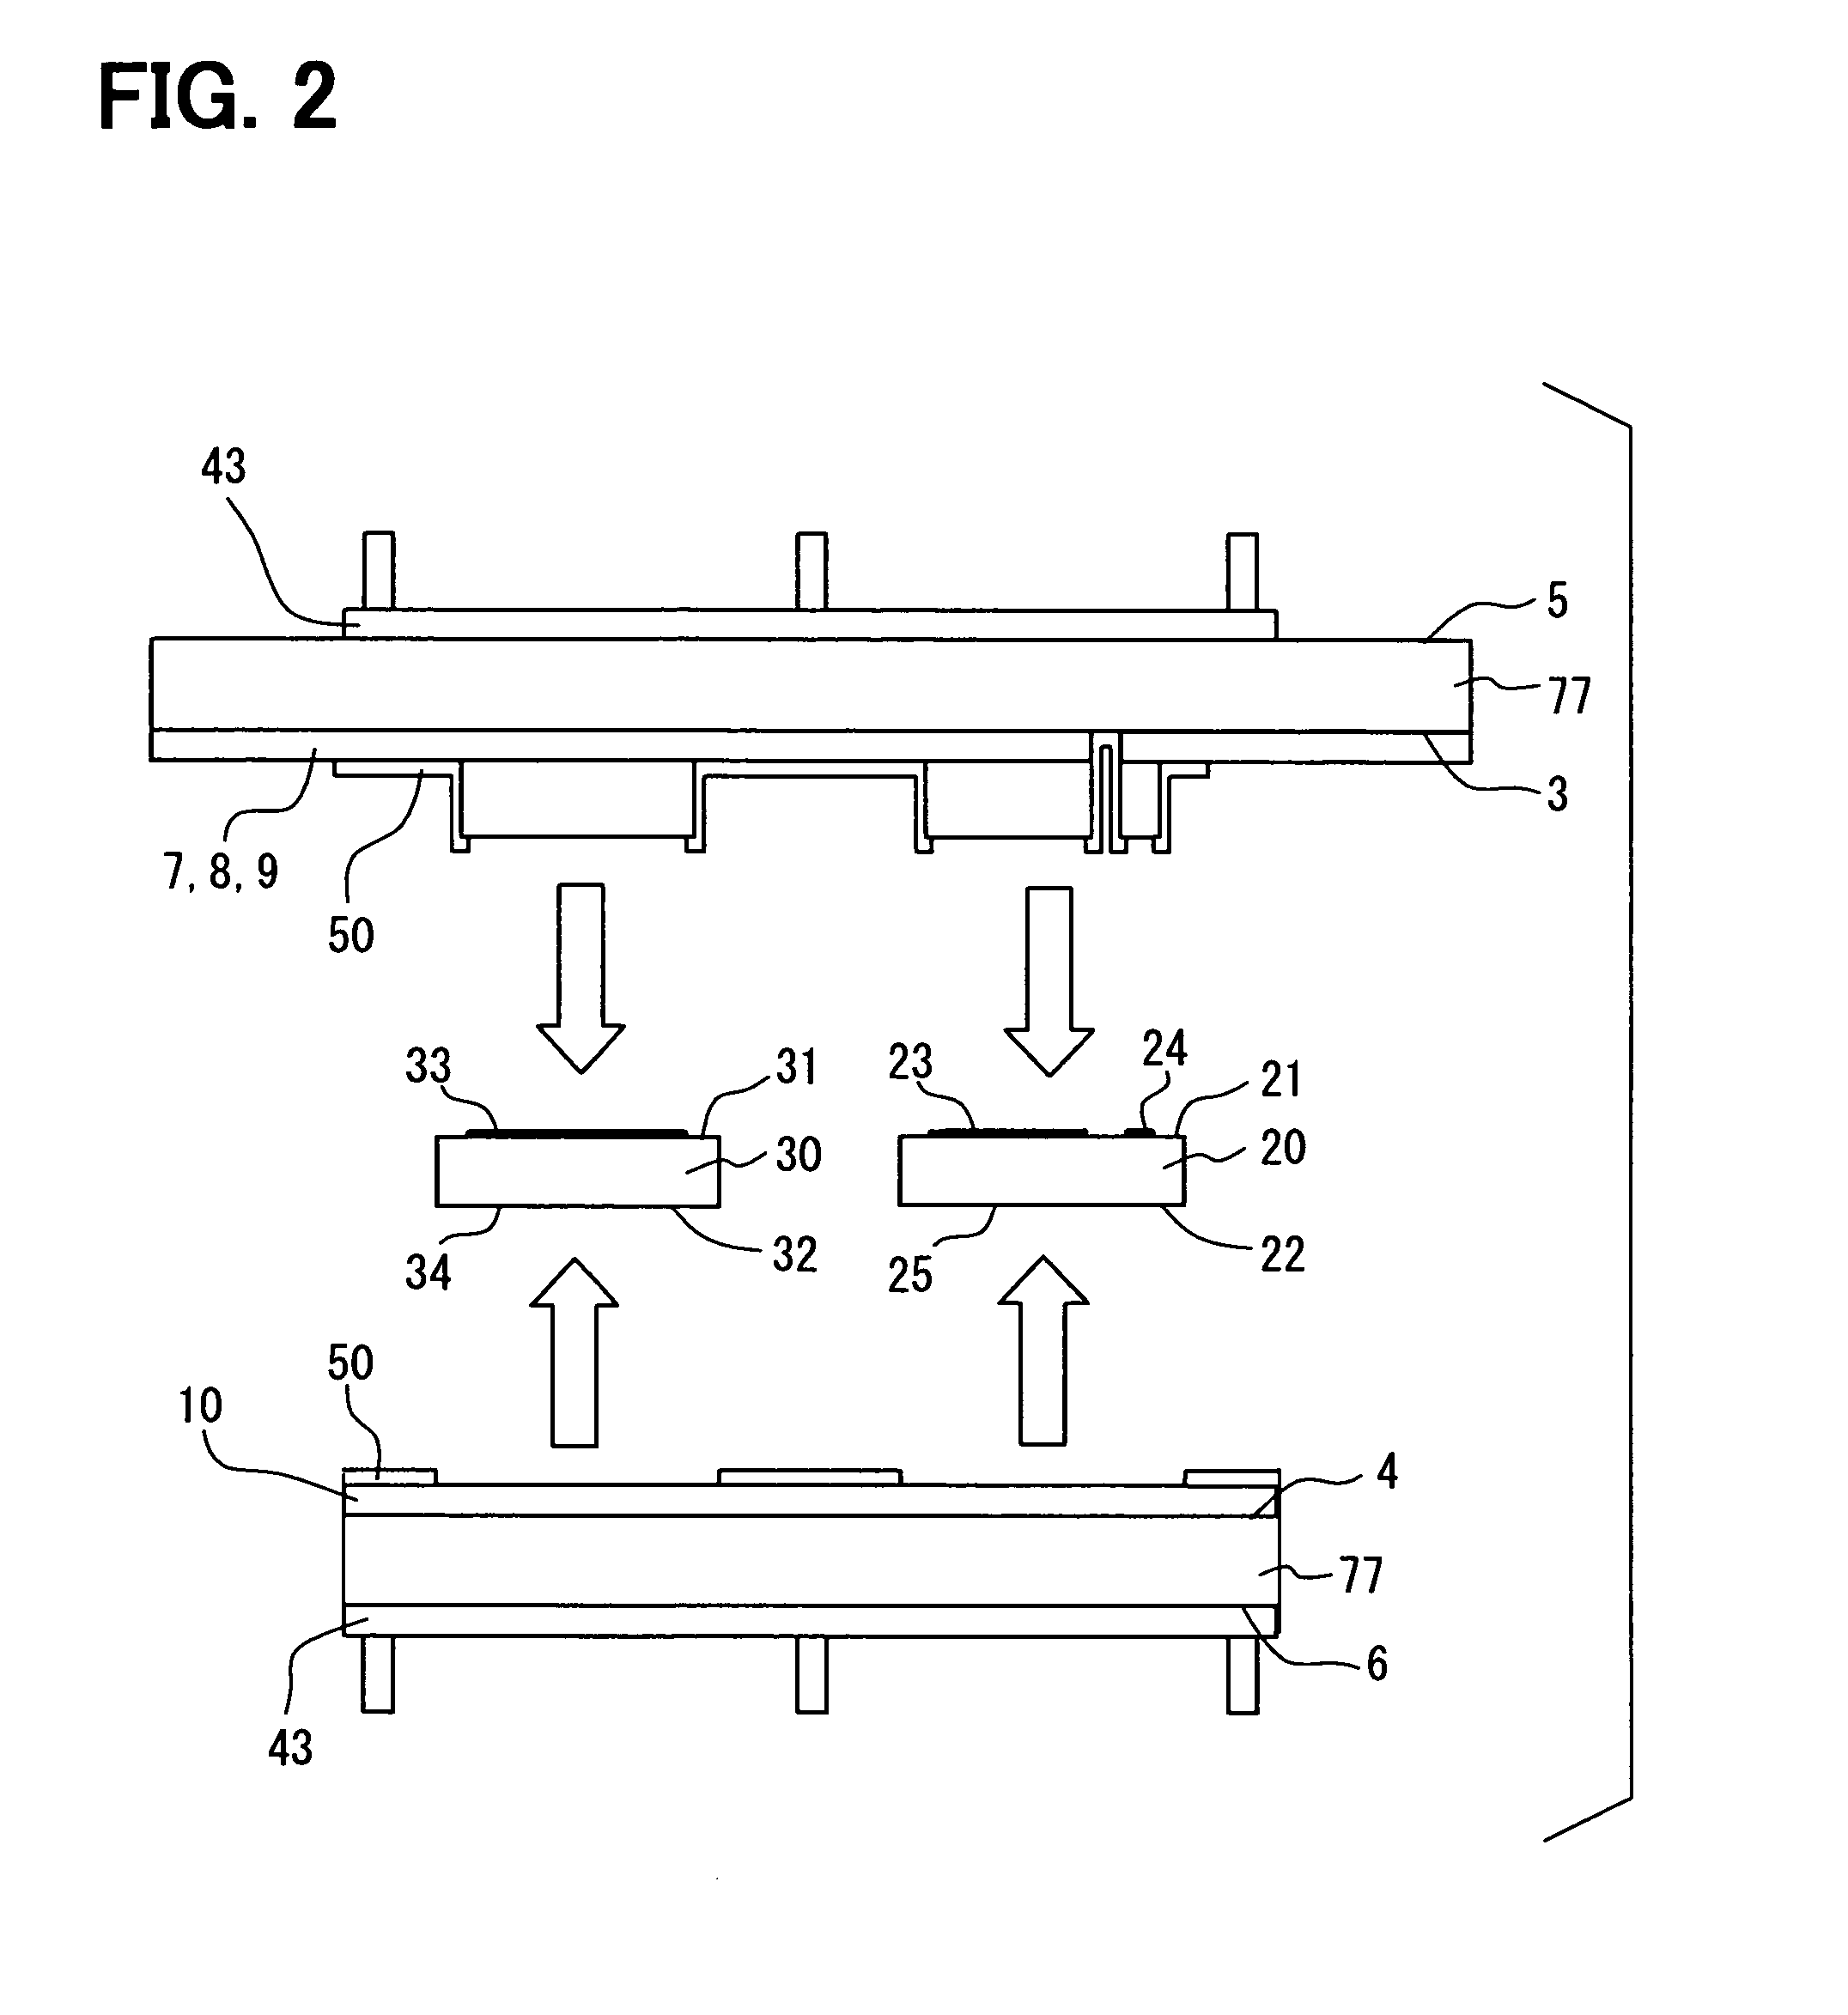 Power electronic package having two substrates with multiple semiconductor chips and electronic components